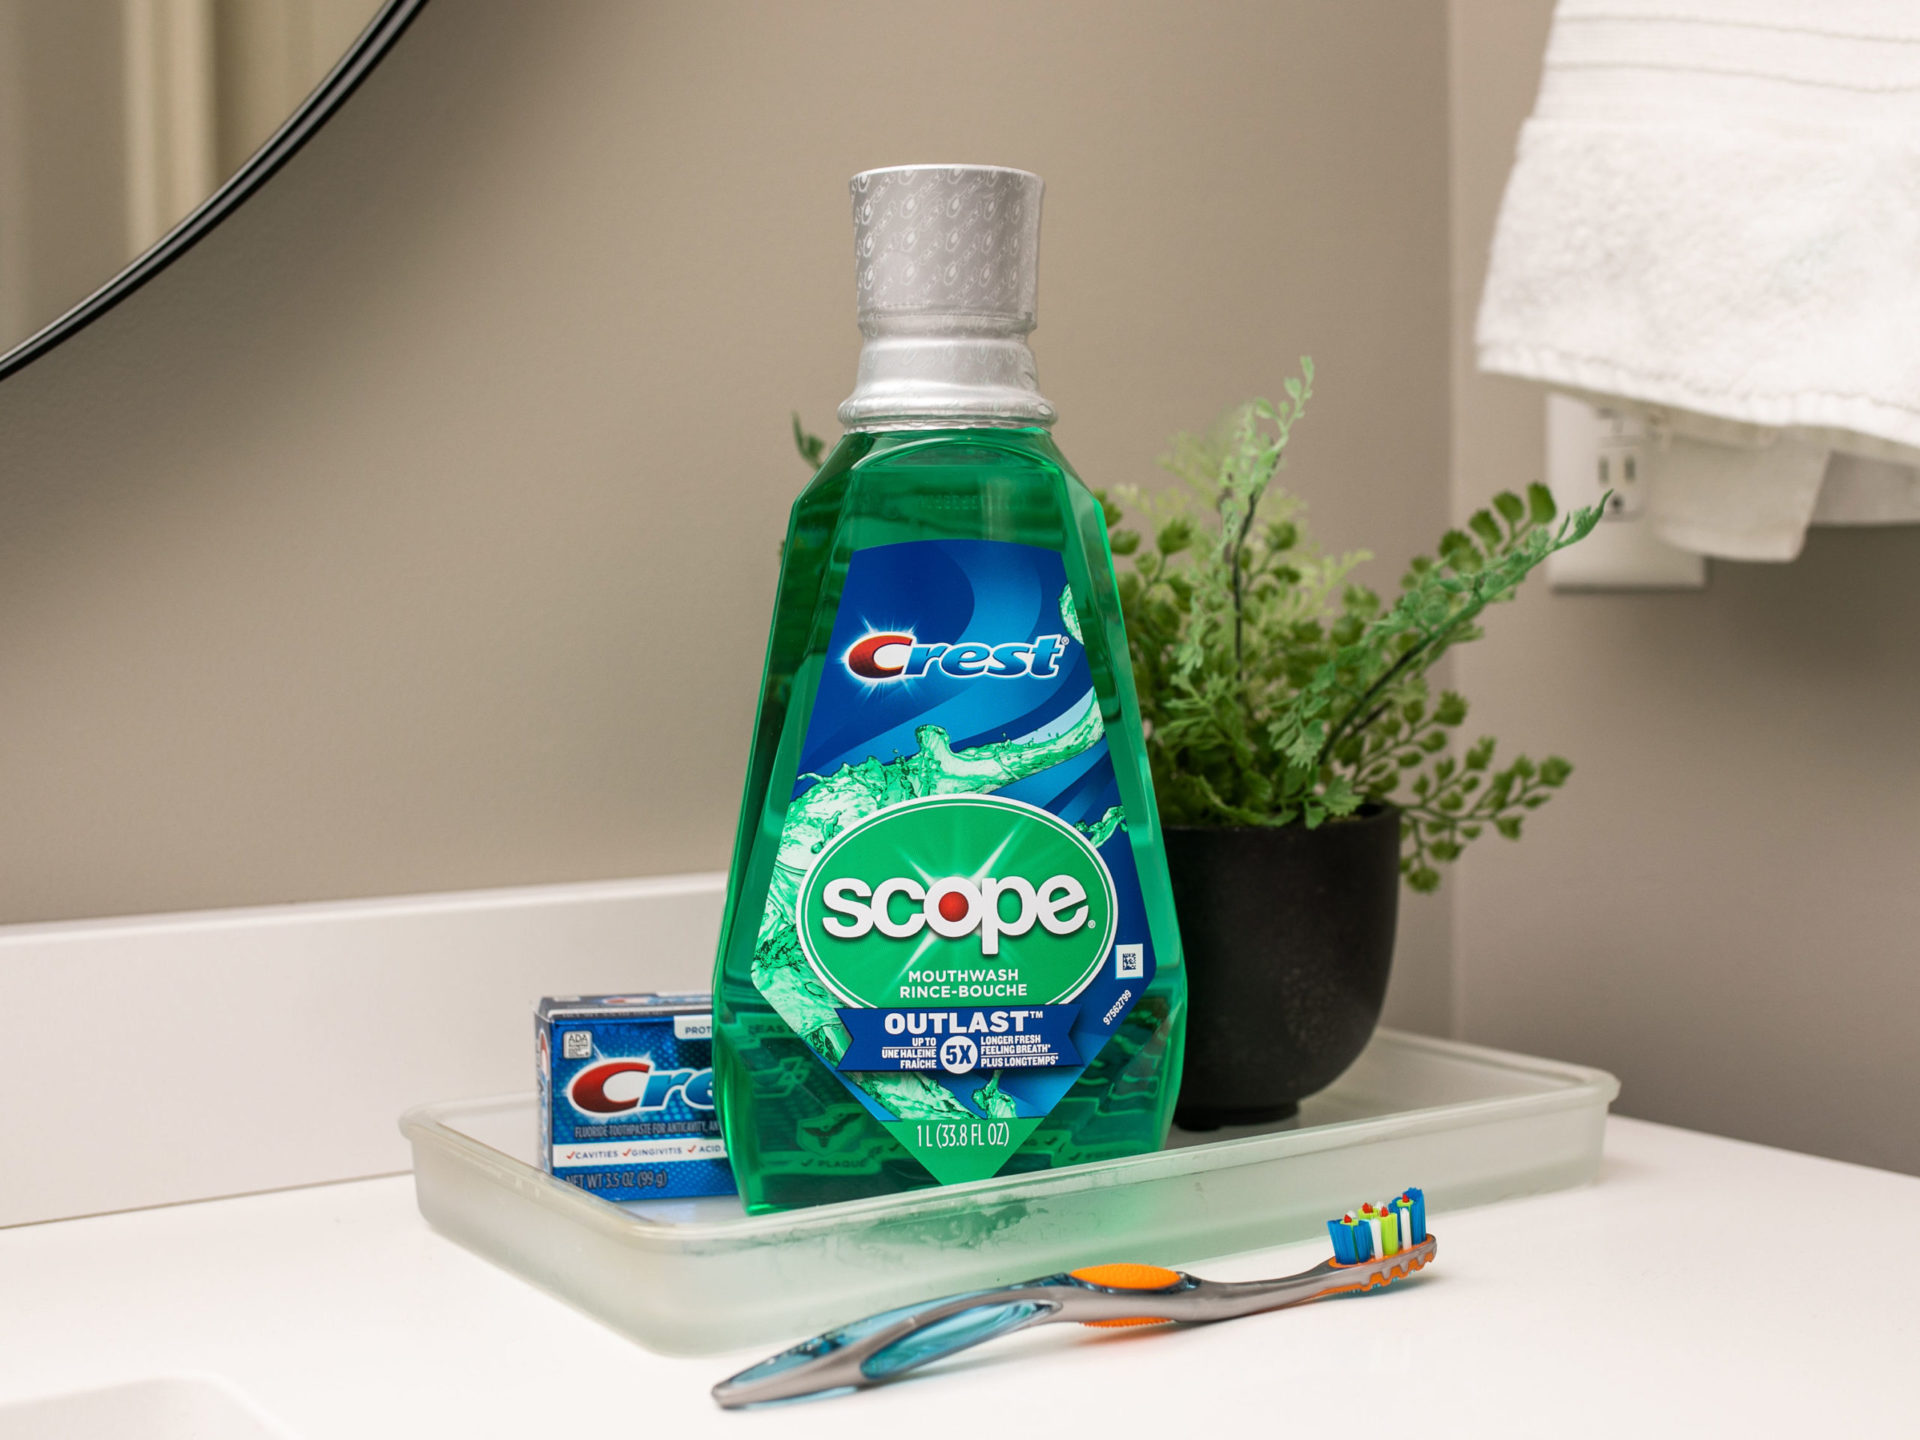 Crest Scope Mouthwash As Low As $2.66 At Kroger